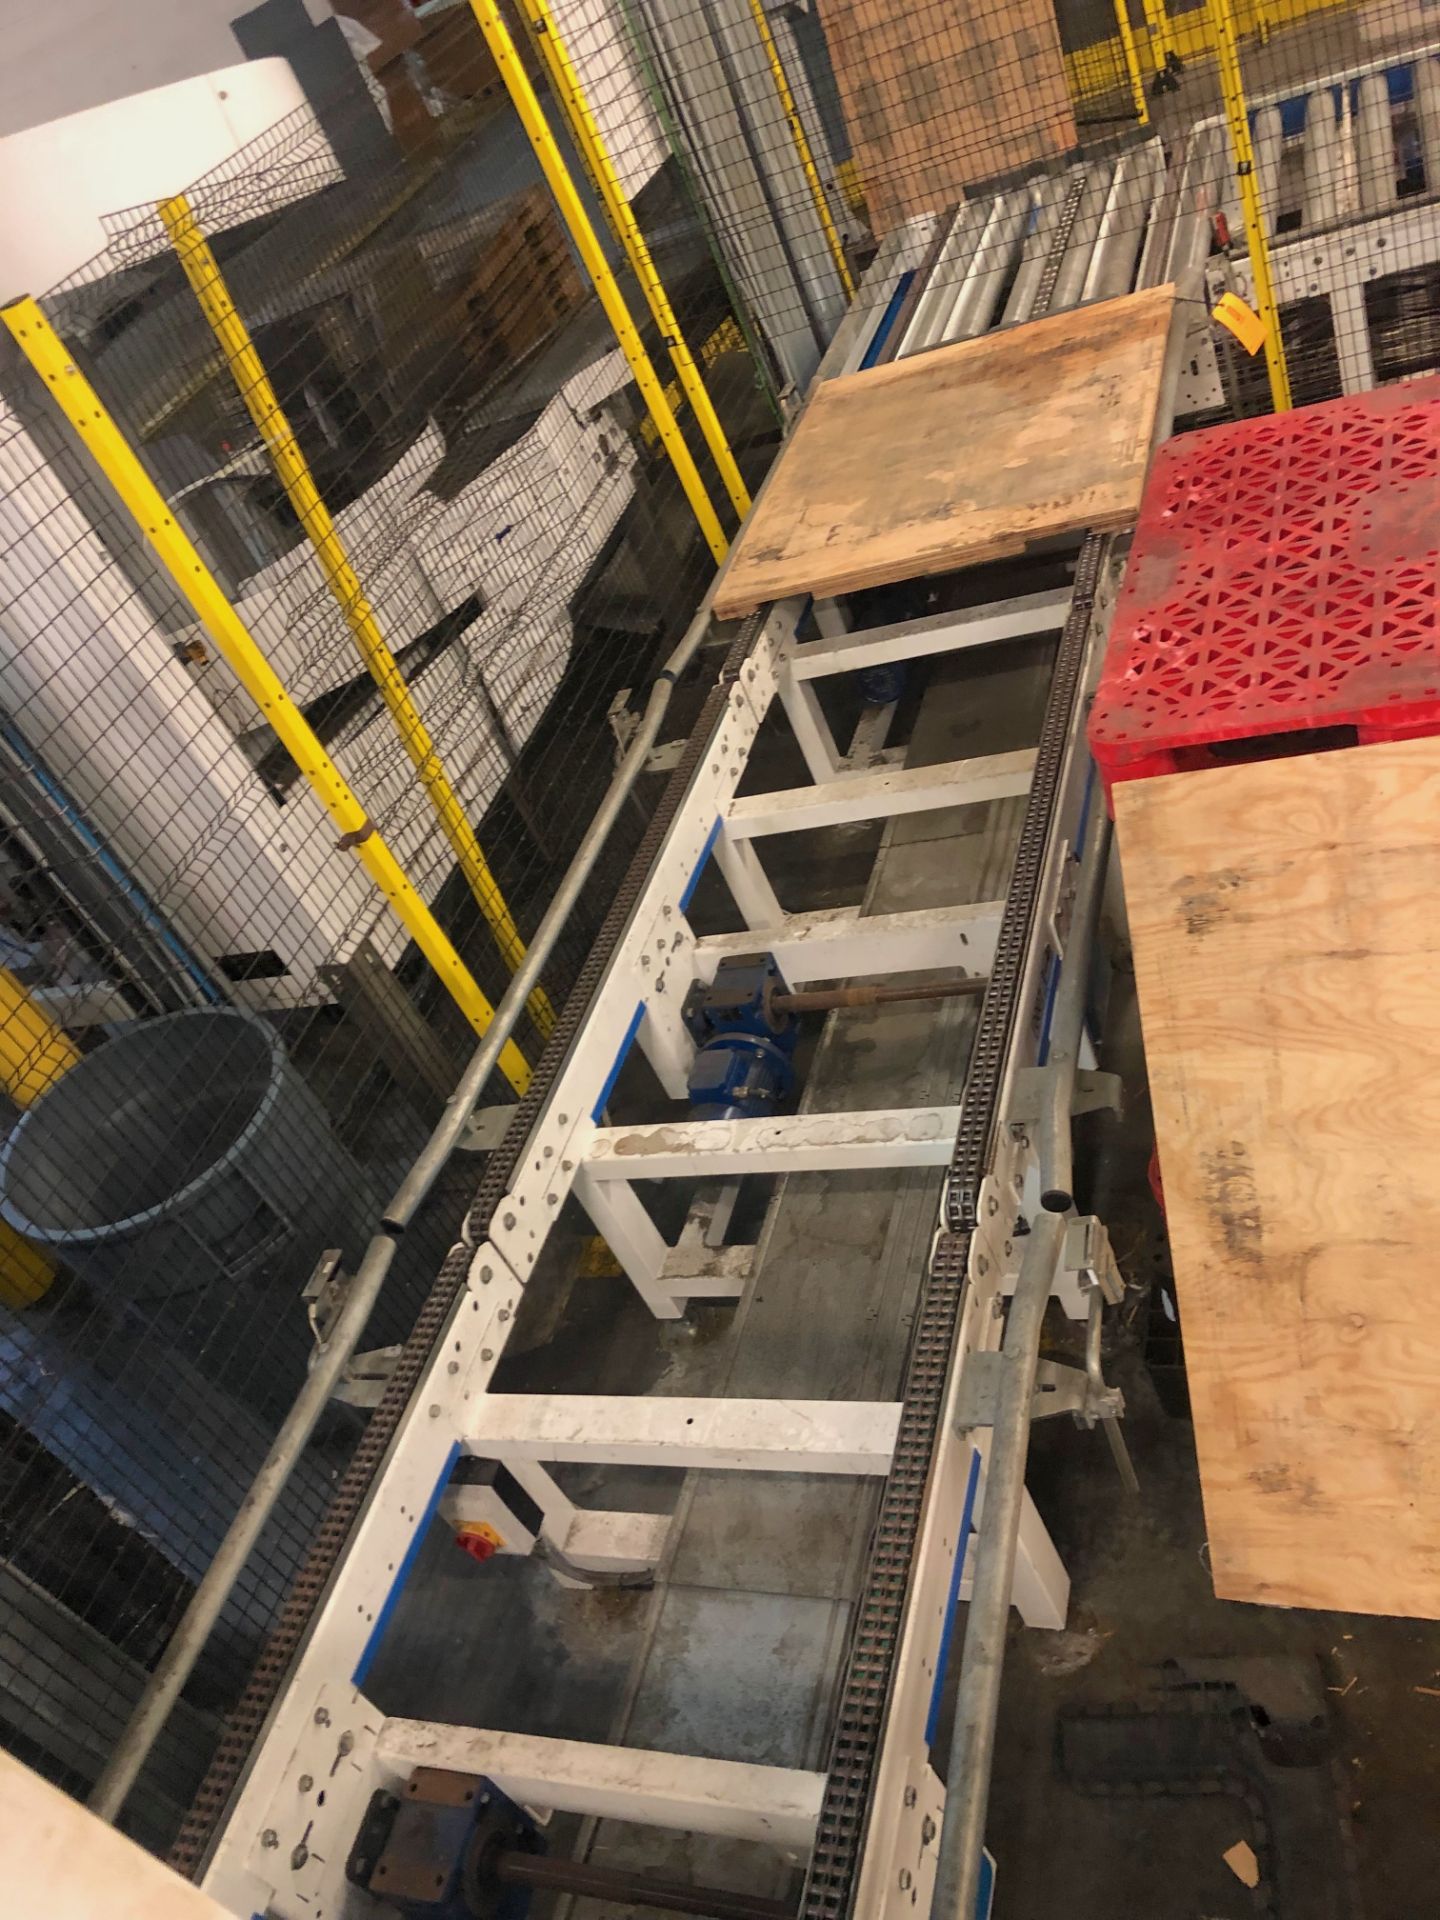 Pallet Dispenser Loading Area (to Feed Pallets to Robotic Palletizers) - Image 13 of 17